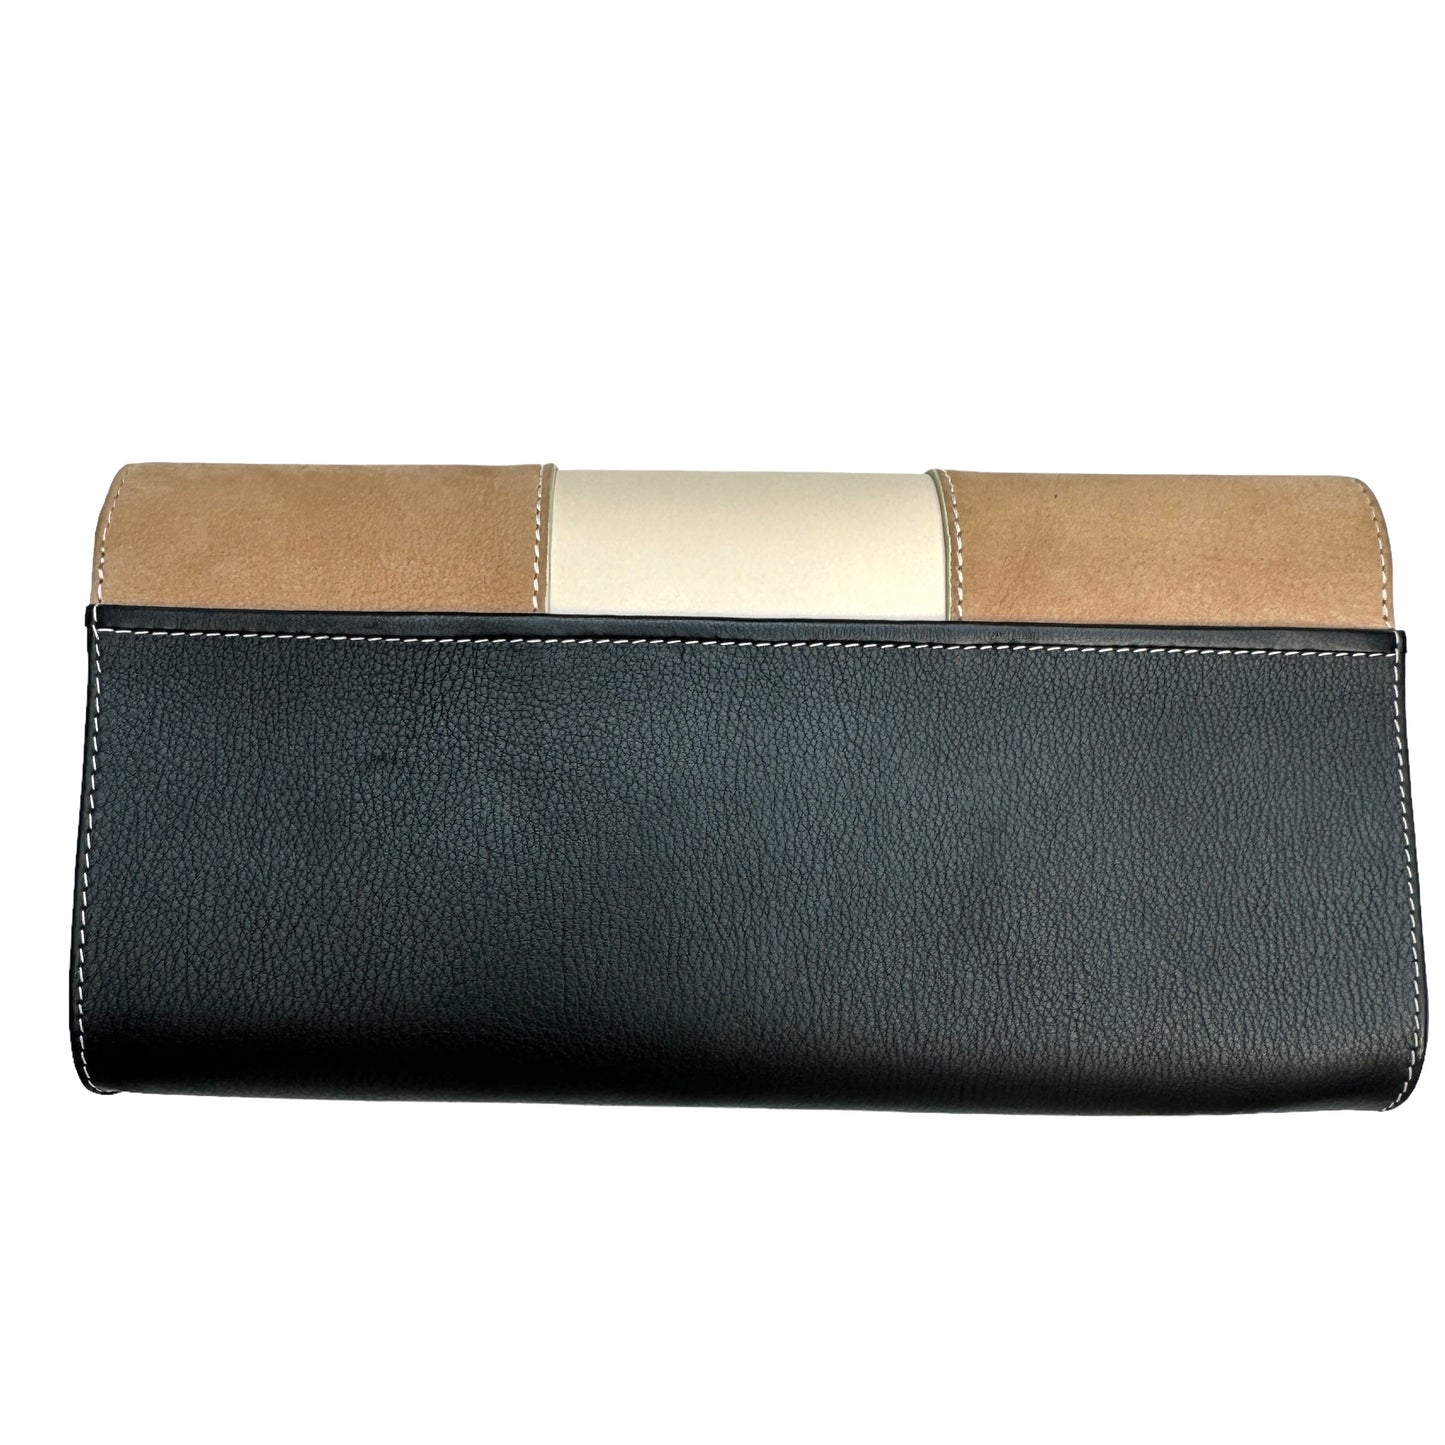 Brown and Black Clutch